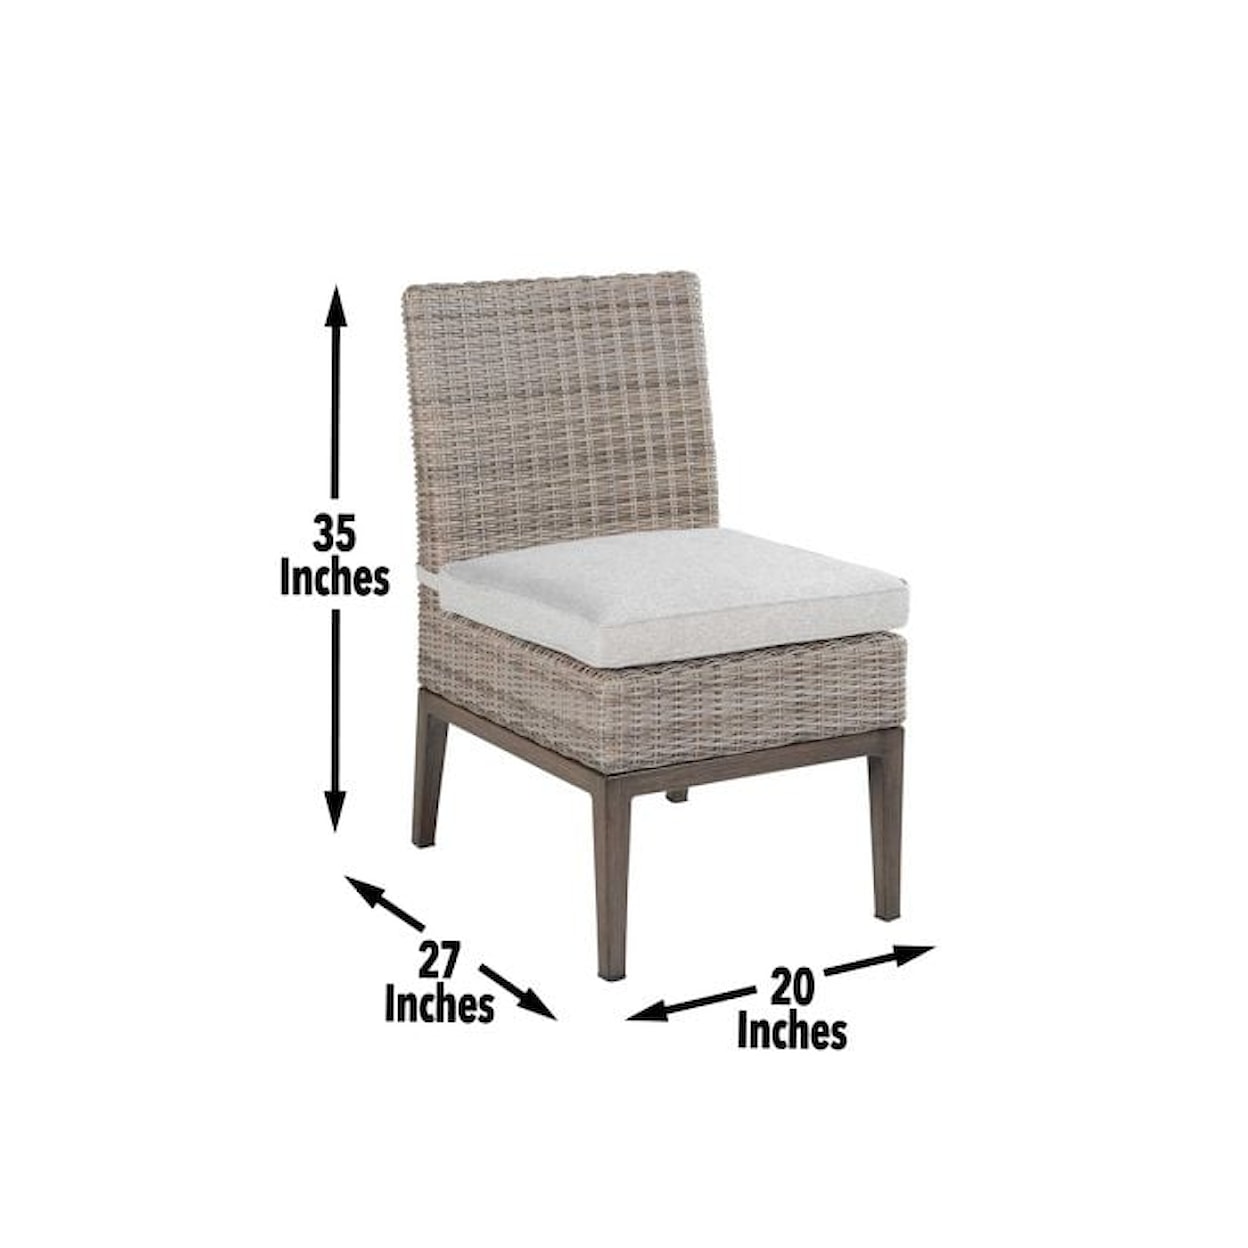 Prime Marina Outdoor Side Chair